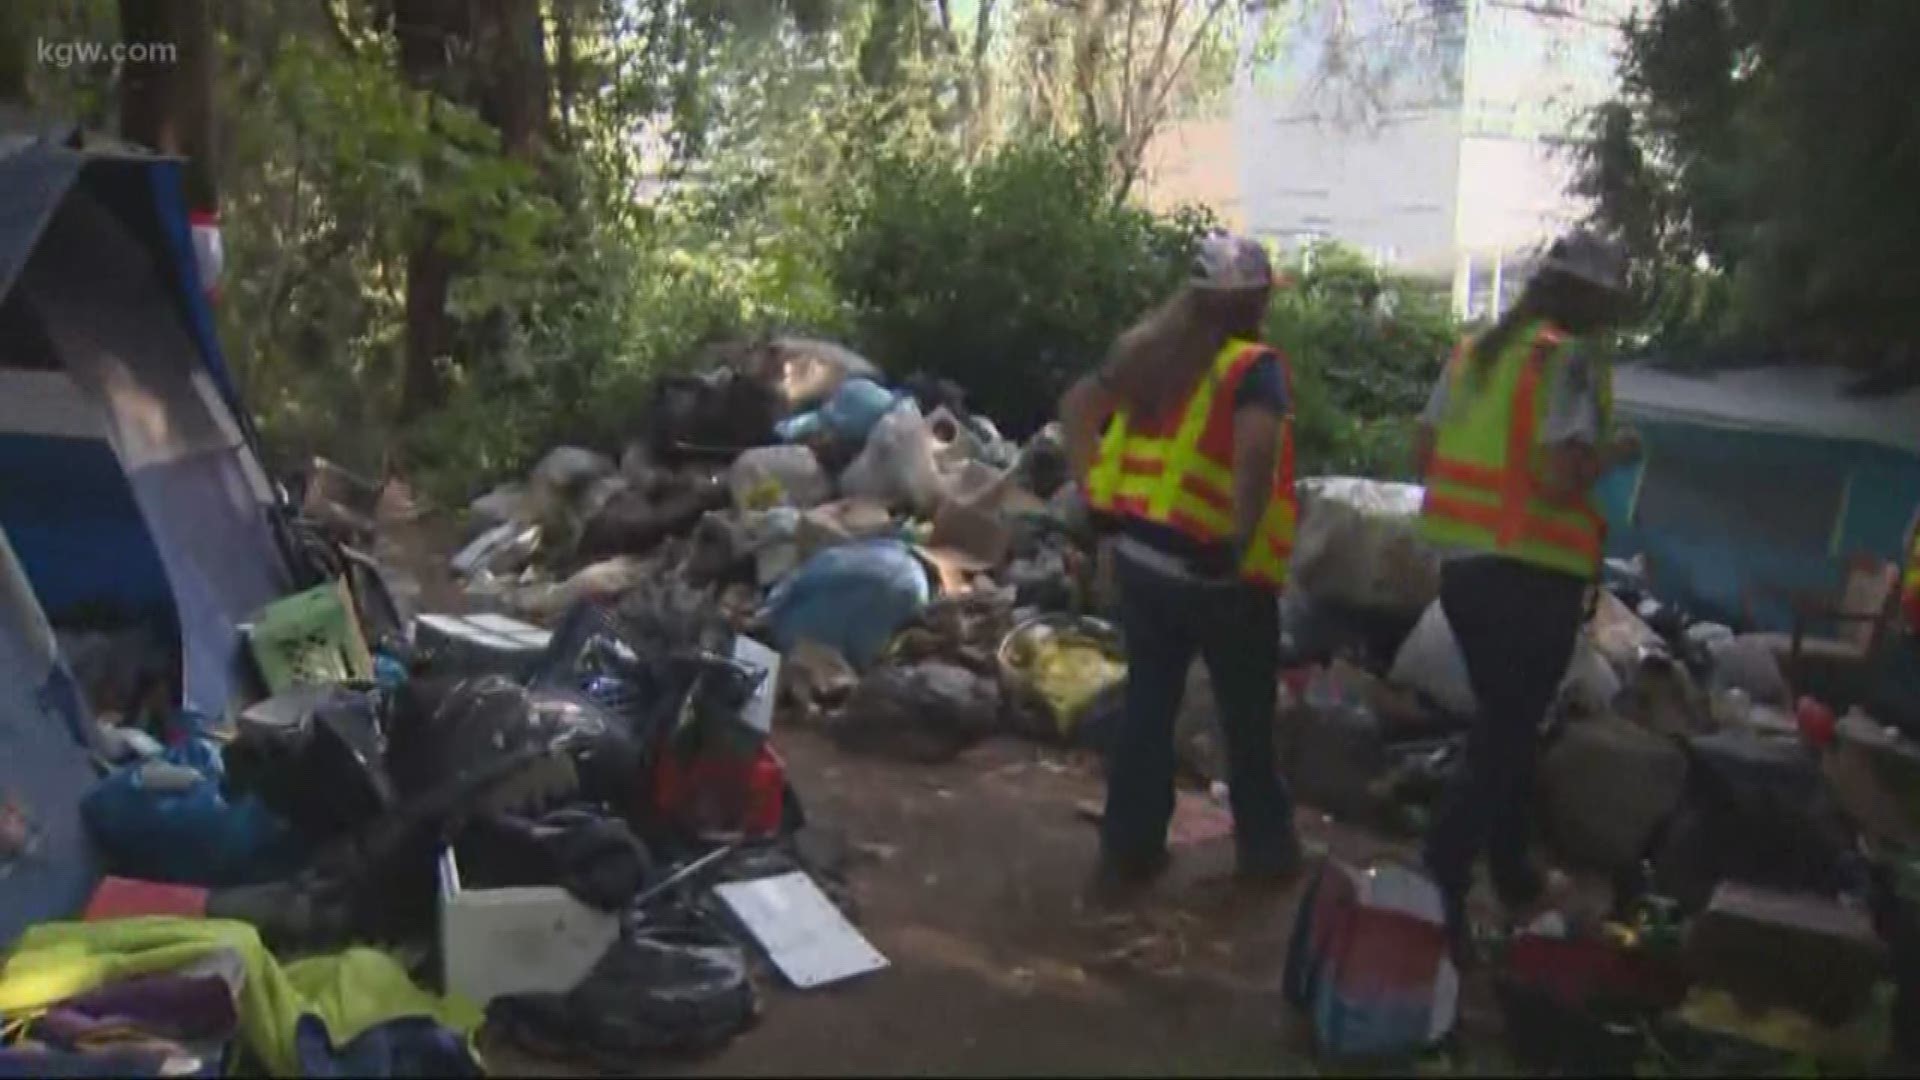 The Oregon Department of Transportation cleared a homeless camp along Interstate 5 in Portland.